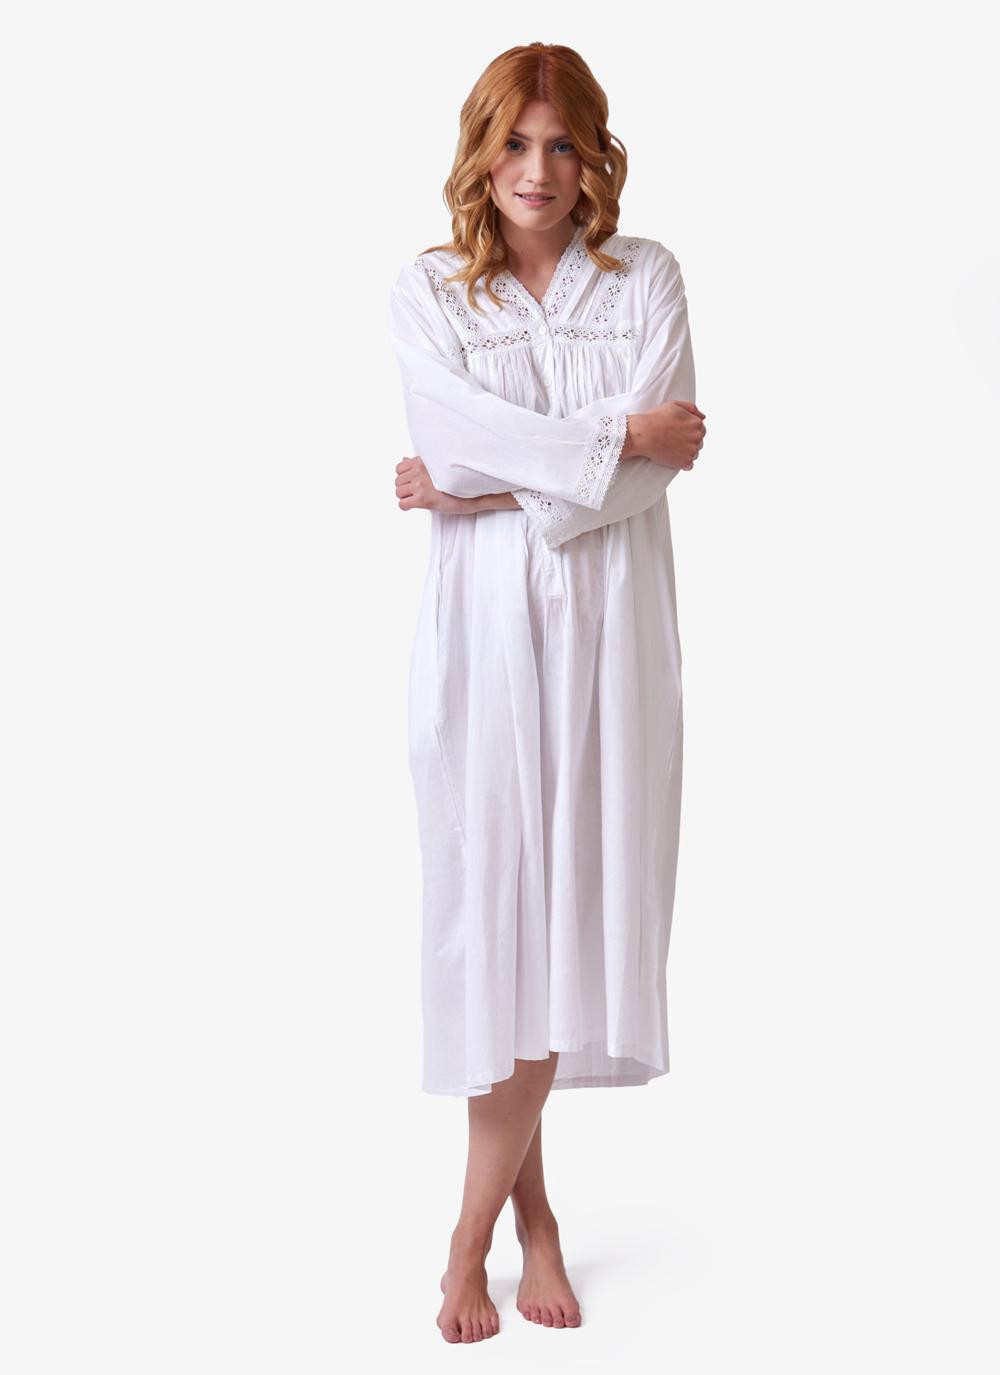 April Long Sleeve Cotton Nightgown in White | Blarney